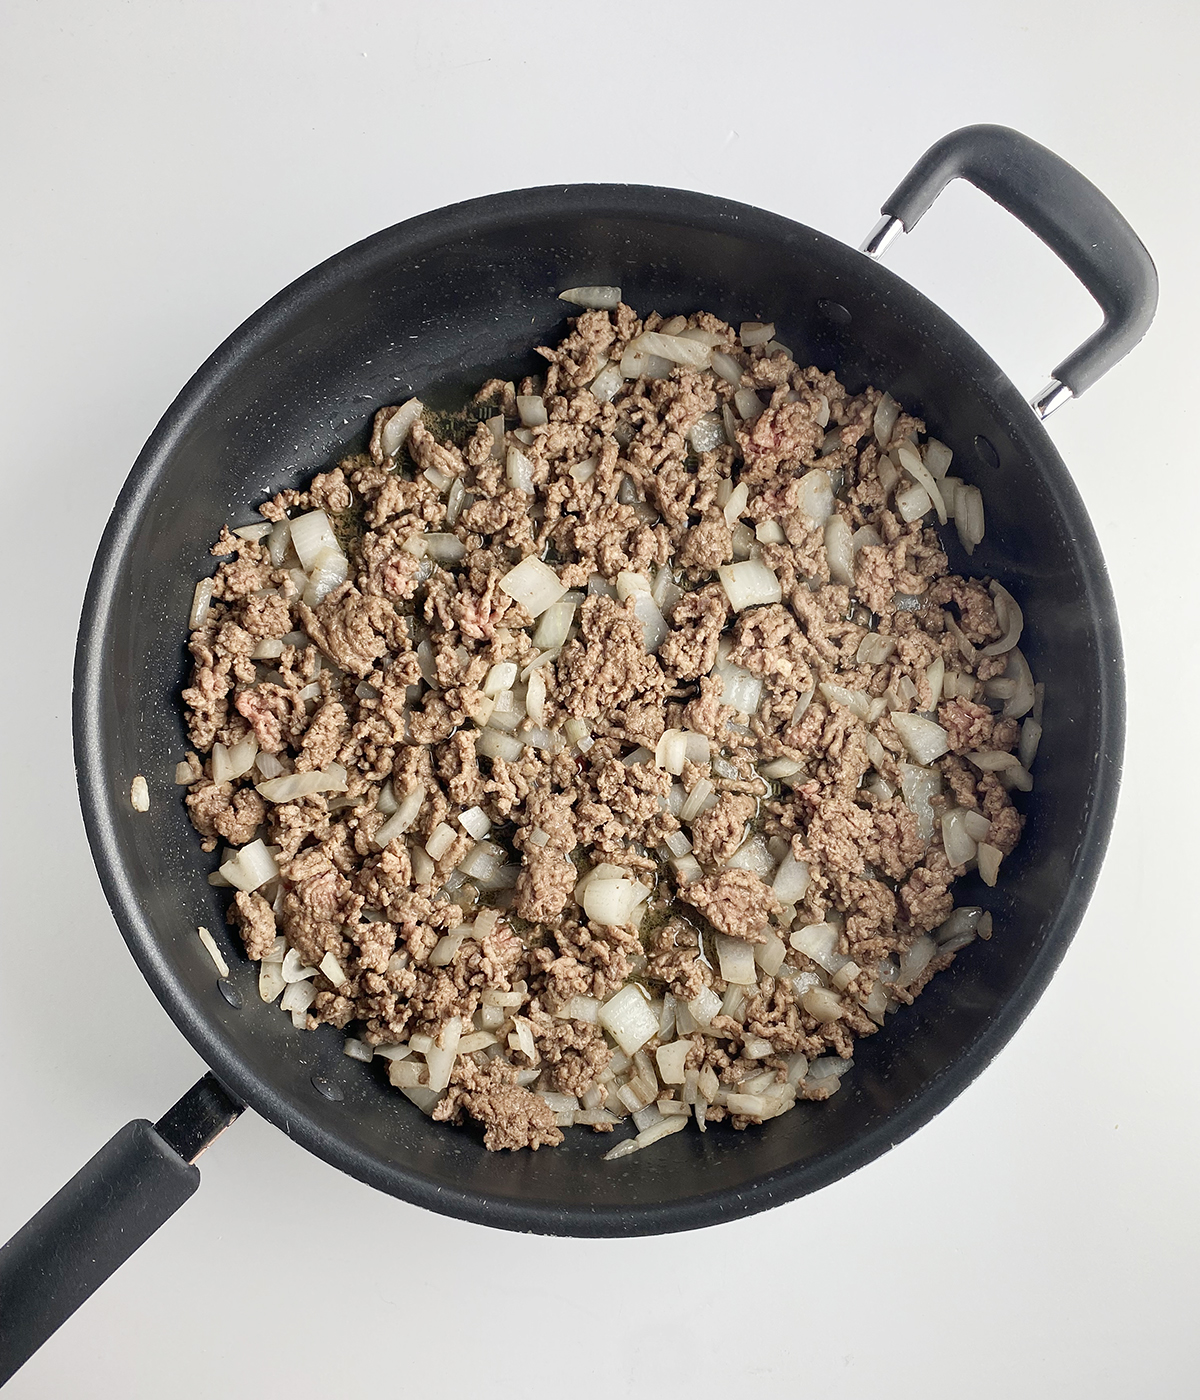 Cooked ground beef and onion in a skillet.